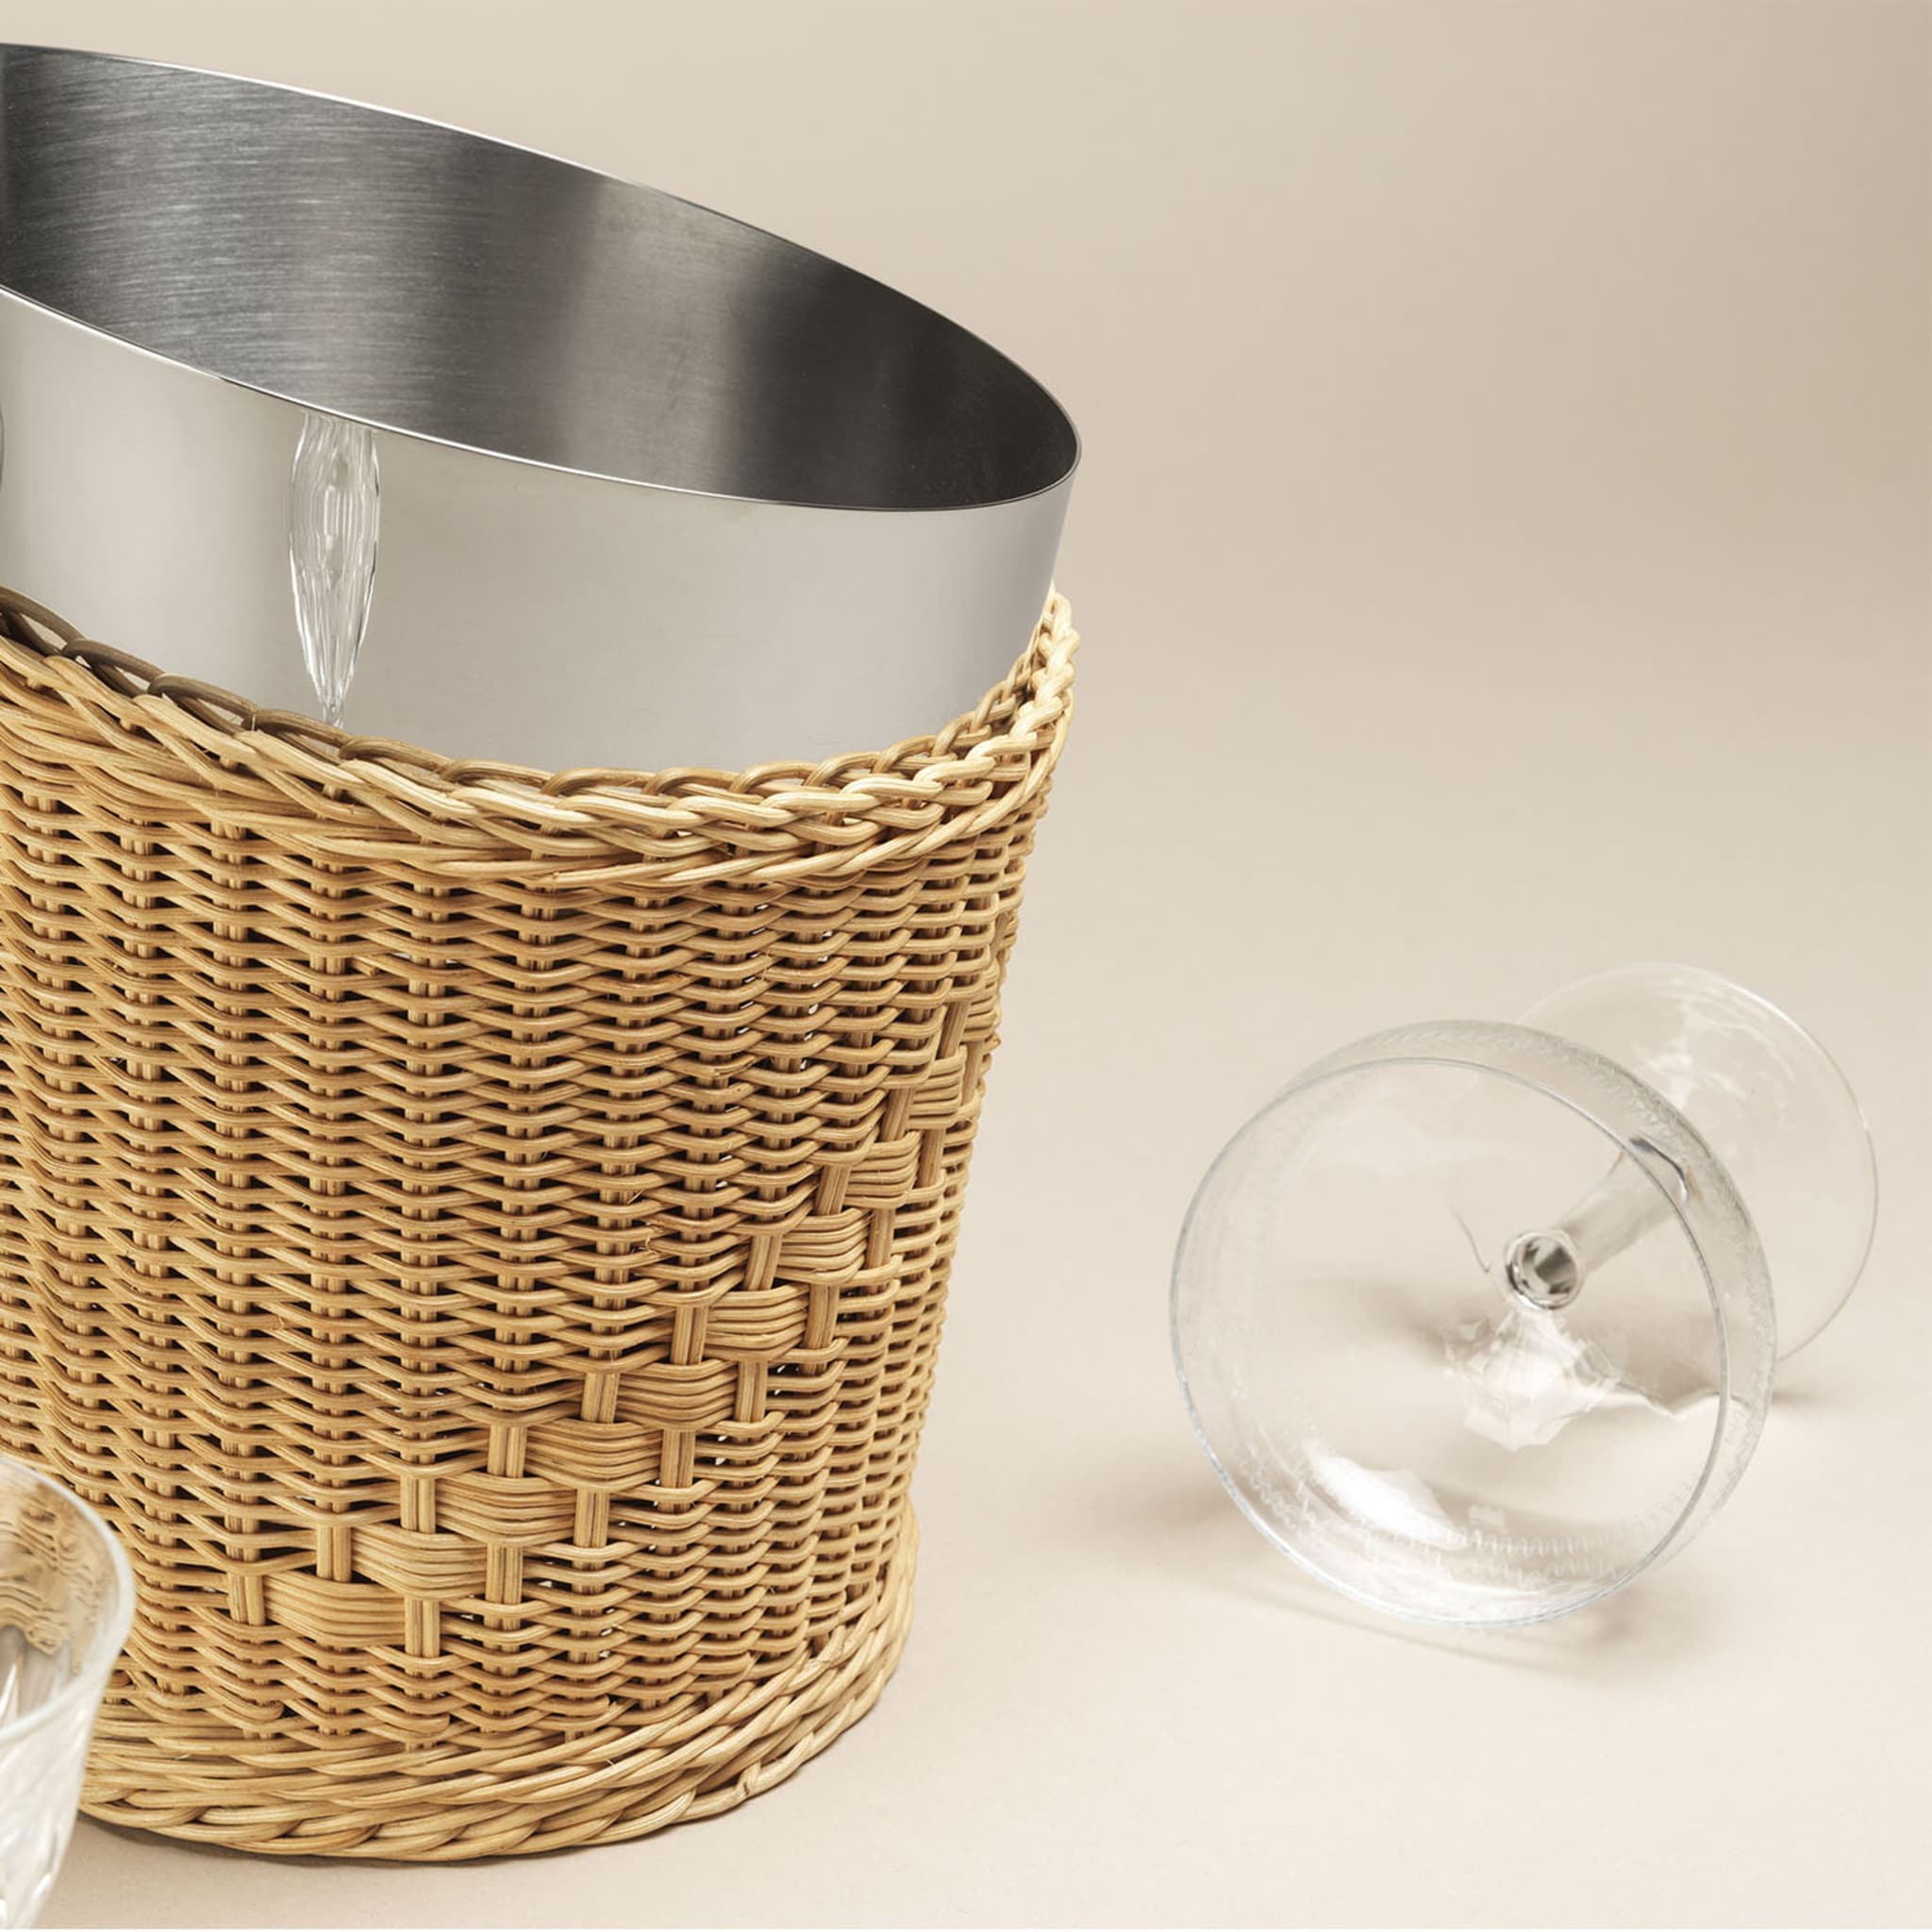 Orchidea Wicker Basket with Stainless Steel Champagne Bucket - Alternative view 2